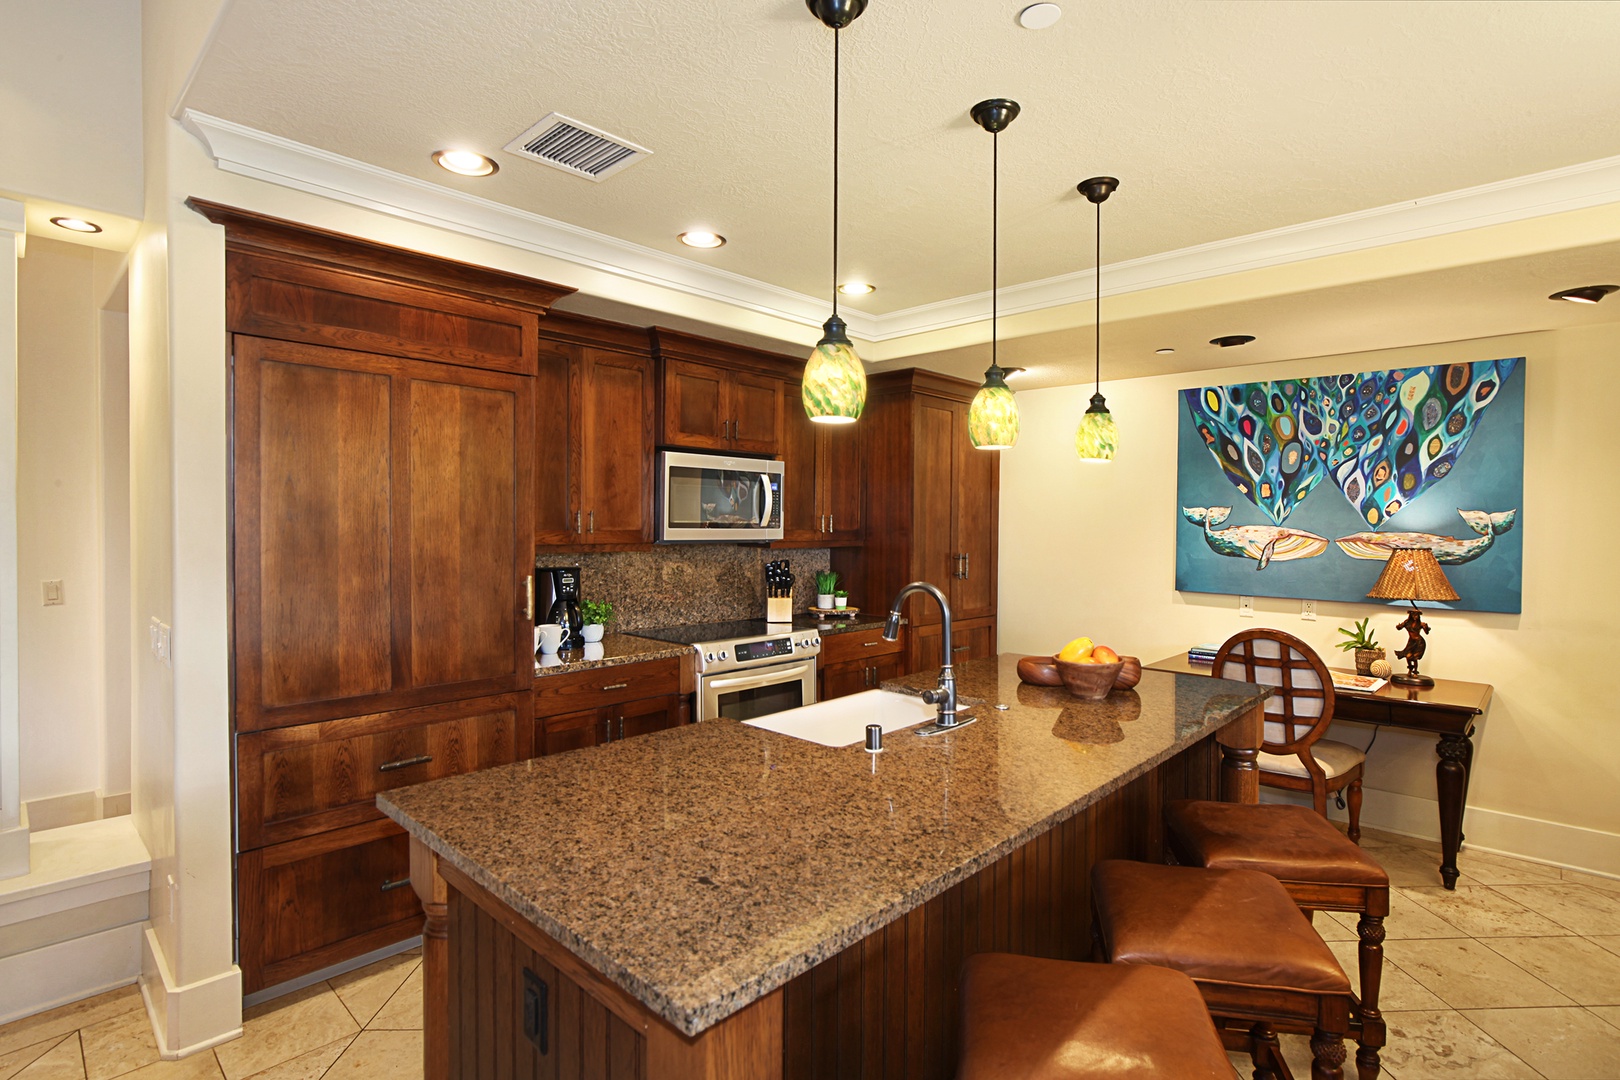 Koloa Vacation Rentals, Villas at Poipu Kai B300 - Kitchen with bar seating, ample appliances and spaces for your culinary delights.